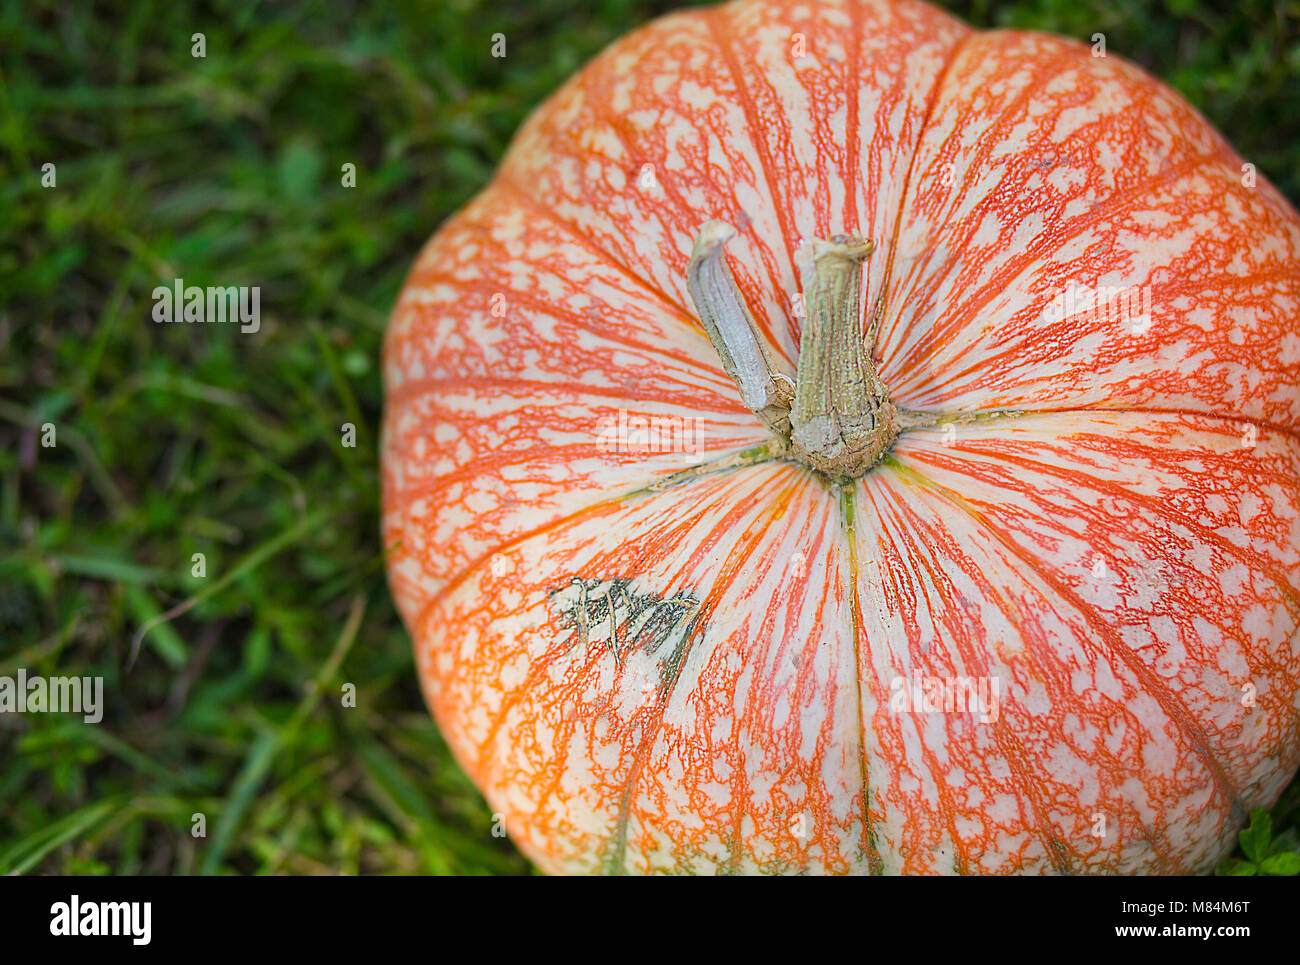 Unique Looking Pumpkin on Green Grass Stock Photo